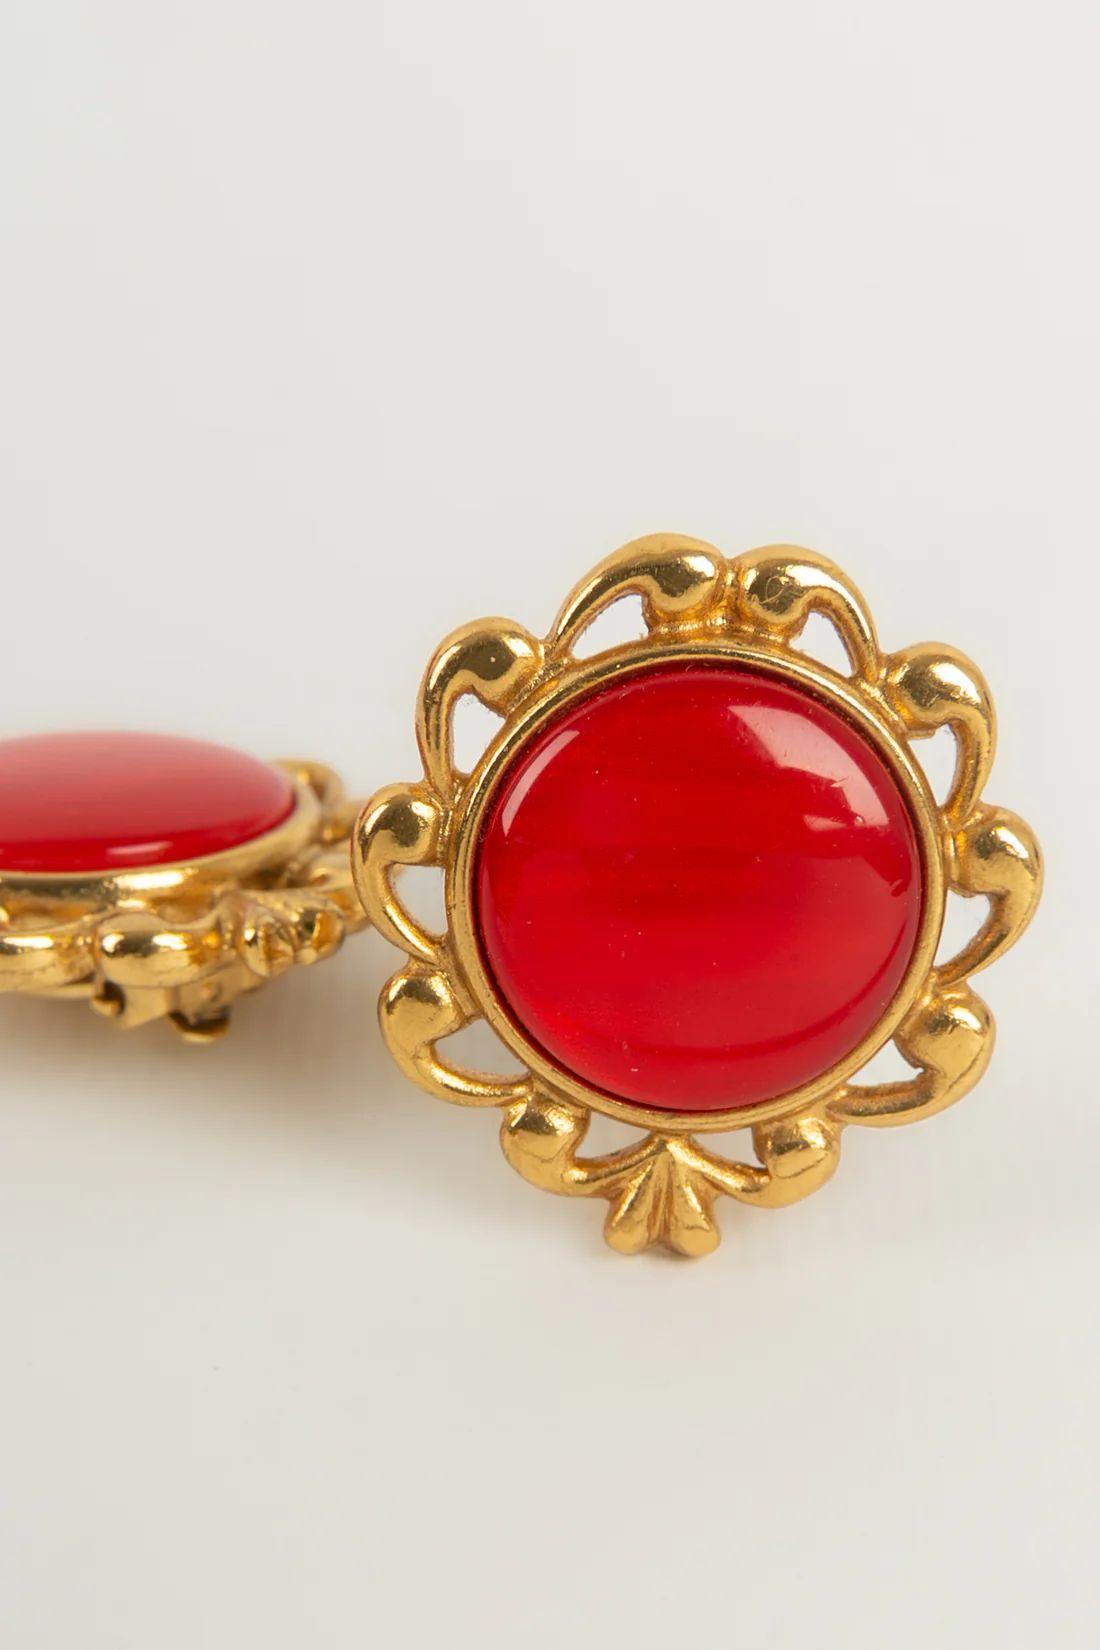 Yves Saint Laurent - (Made in France) Earrings in gold metal and red resin.

Additional information:
Dimensions: Ø 3 cm

Condition: Very good condition

Seller Ref number: BO87